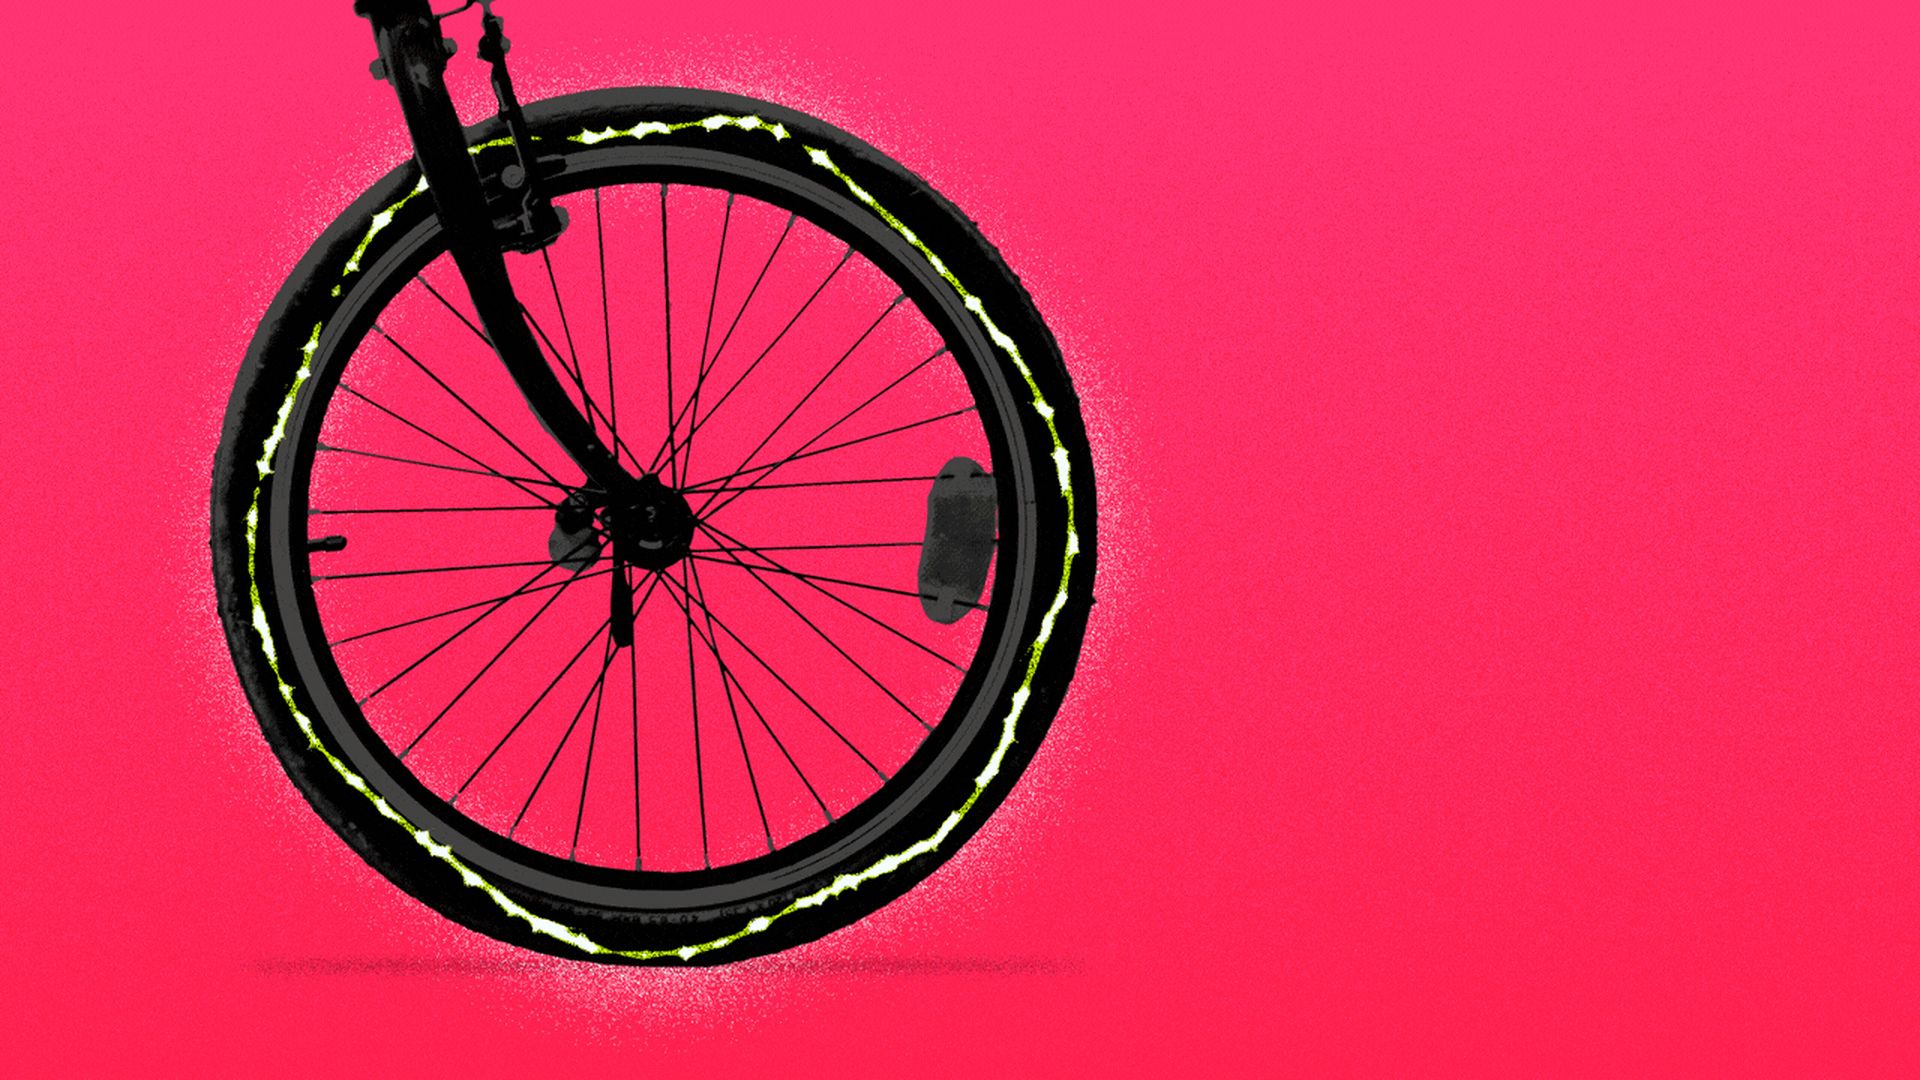 Illustration of a bike wheel that becomes electrified.